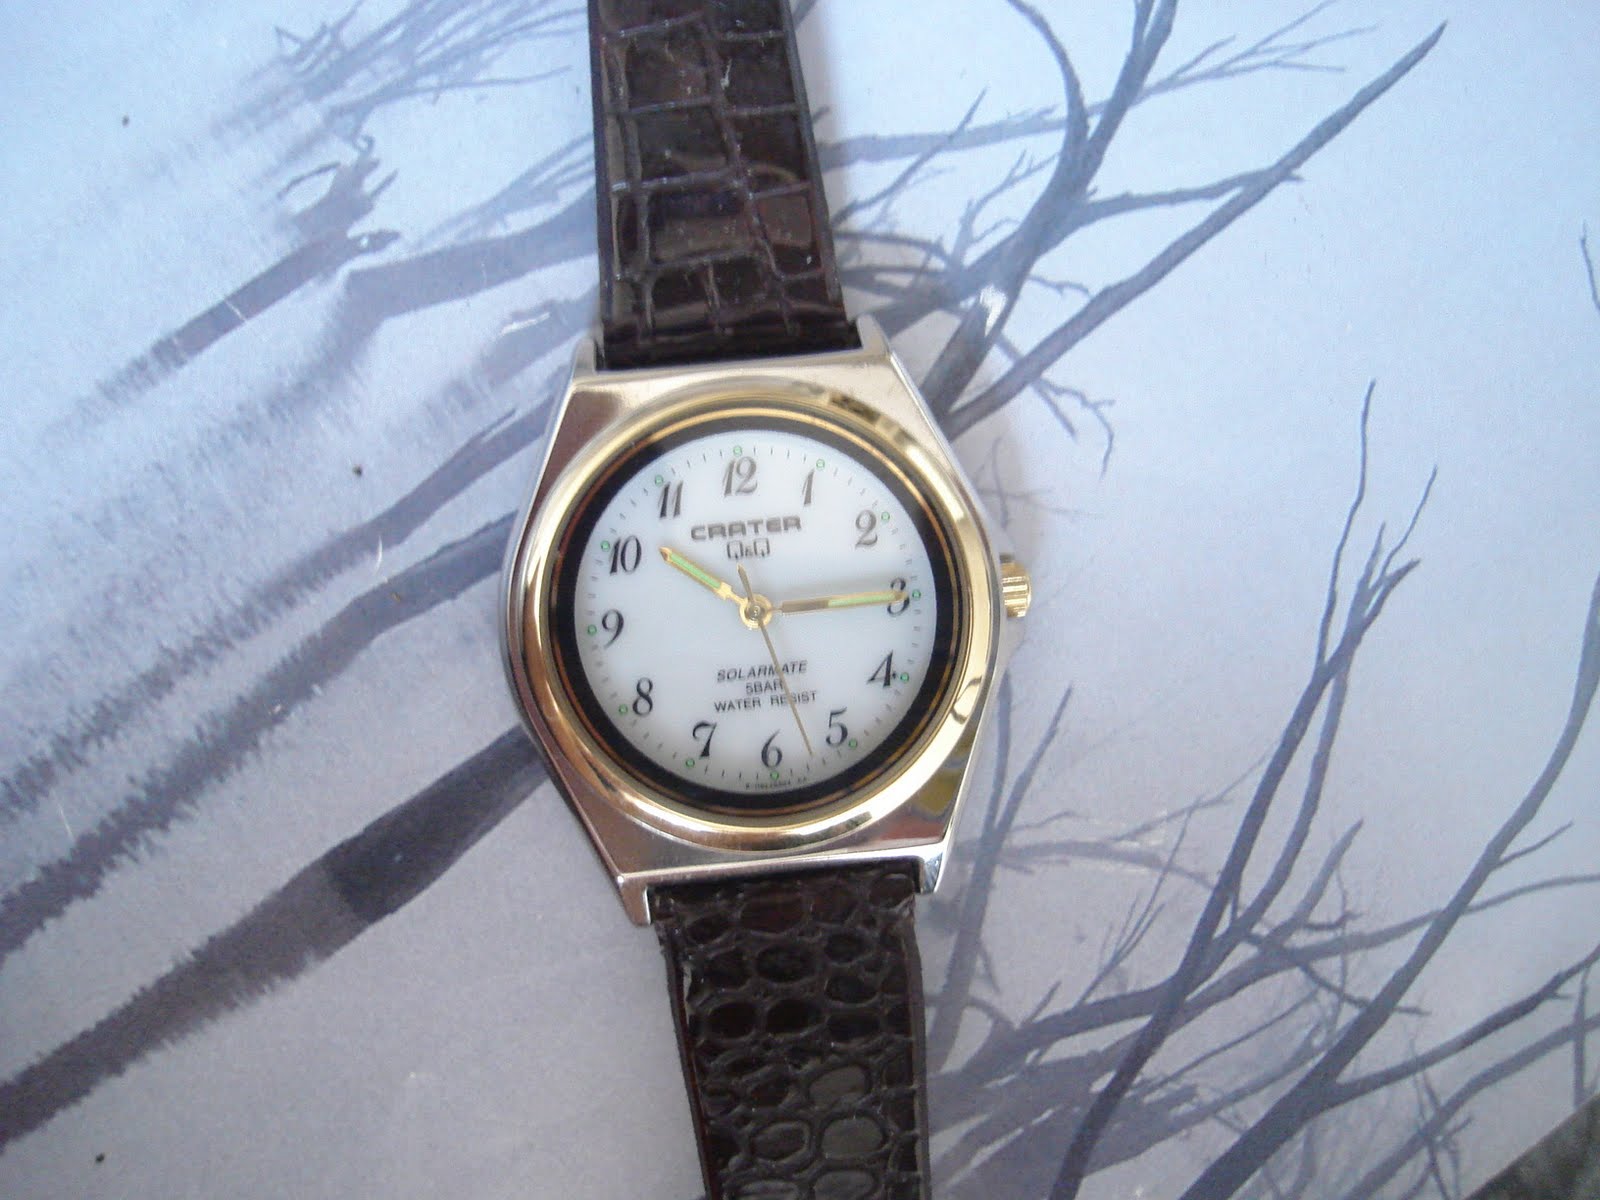 vintage watches: Q & G Crater solarmate watch RM79